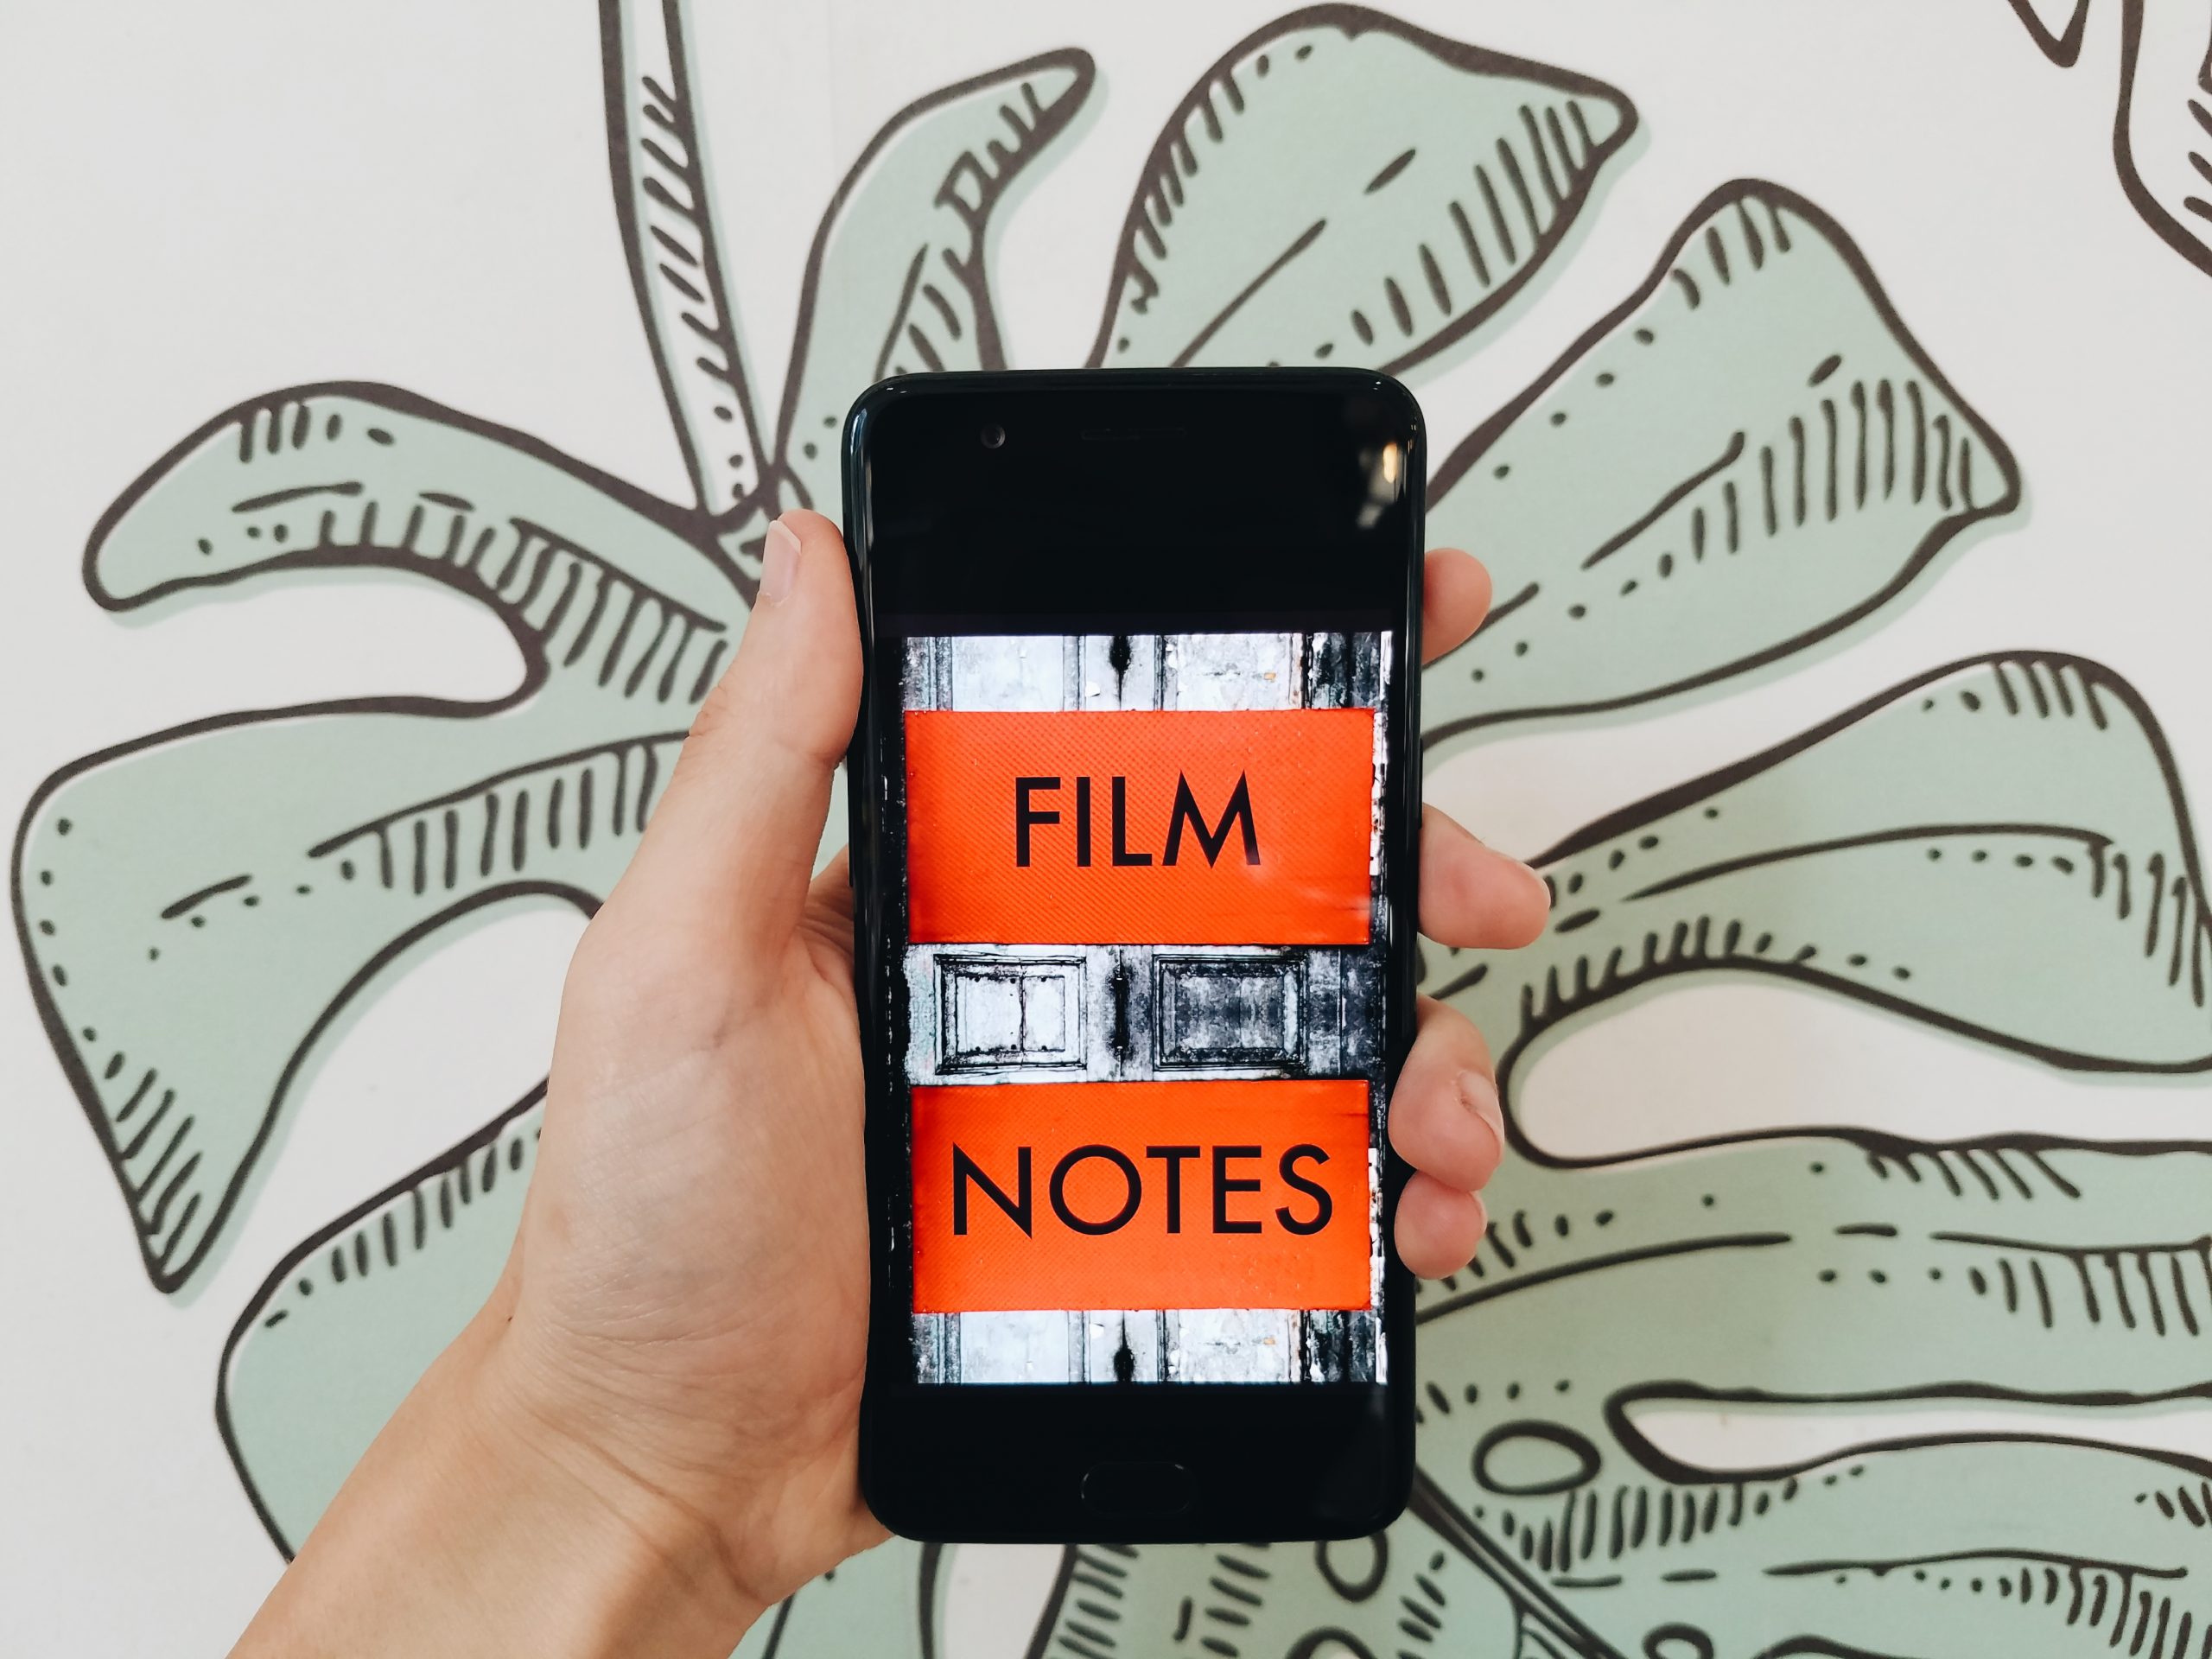 Announcing FILM NOTES MOBILE & PRINTABLE Editions from HAPTIC